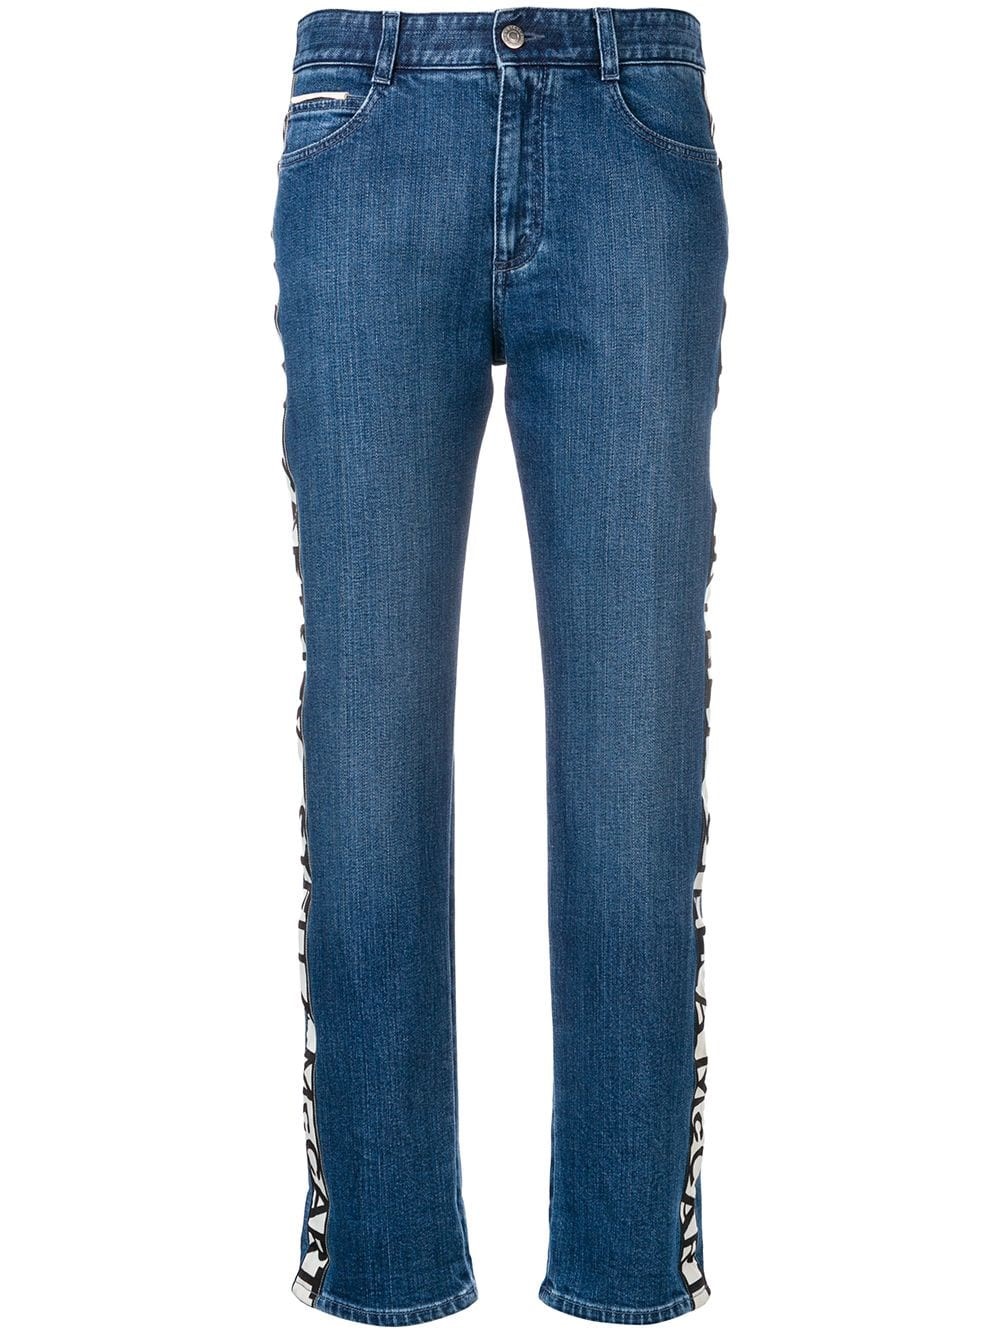 stella mccartney SIDE LOGO JEANS available on montiboutique.com - 27077